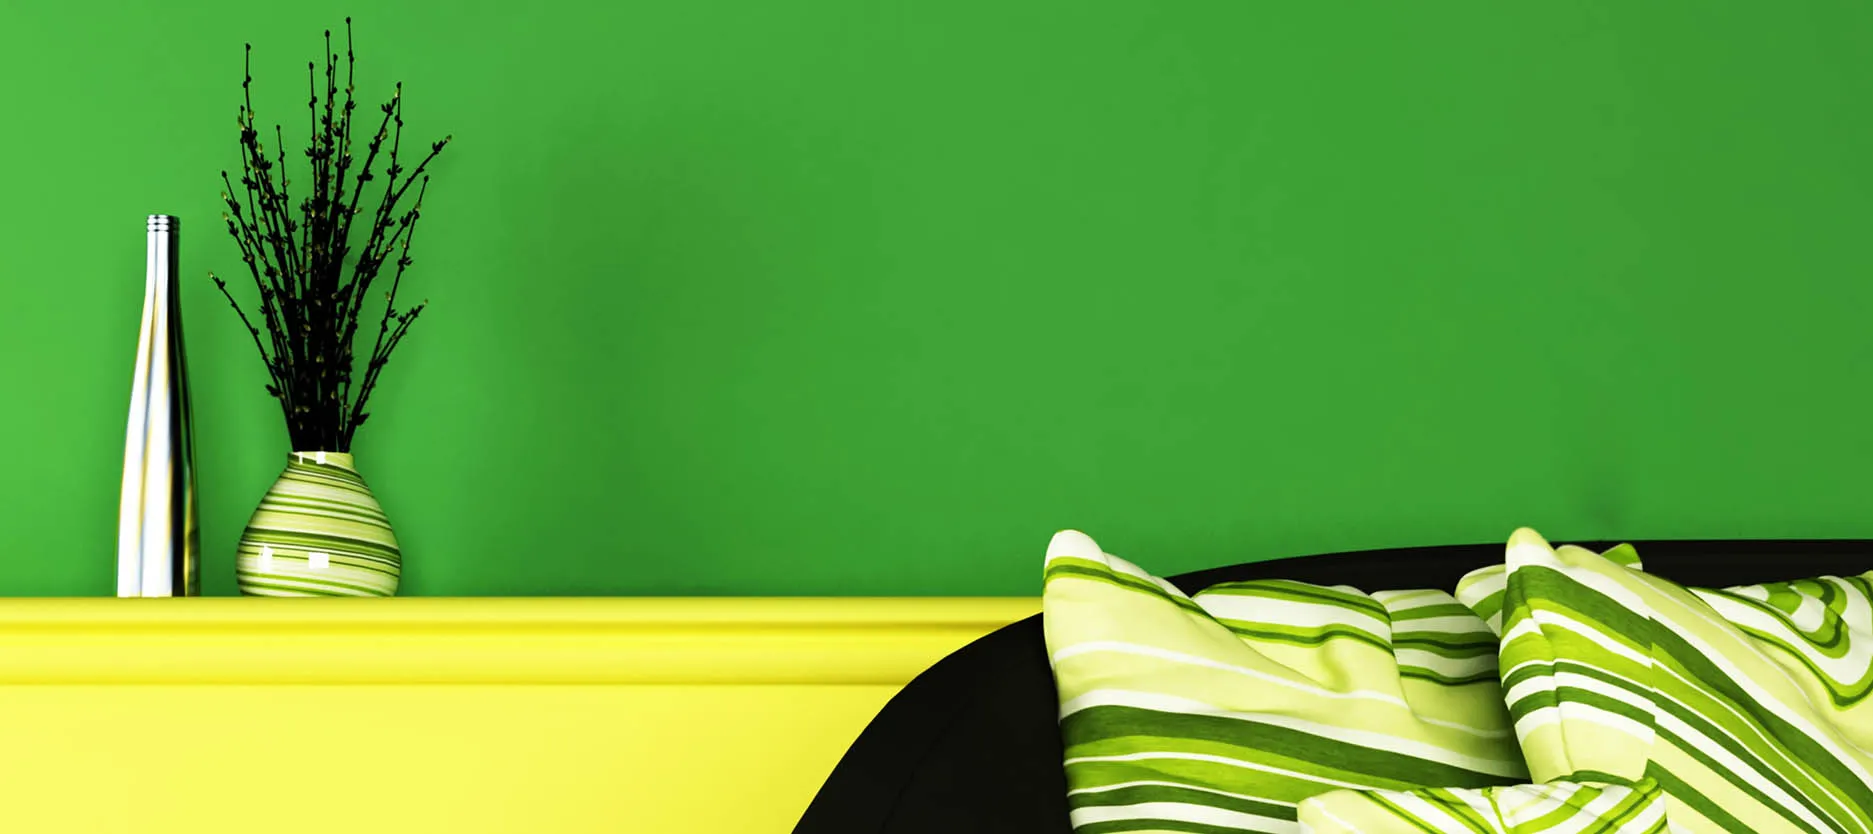 Green and sunny yellow two colour combination for bedroom walls